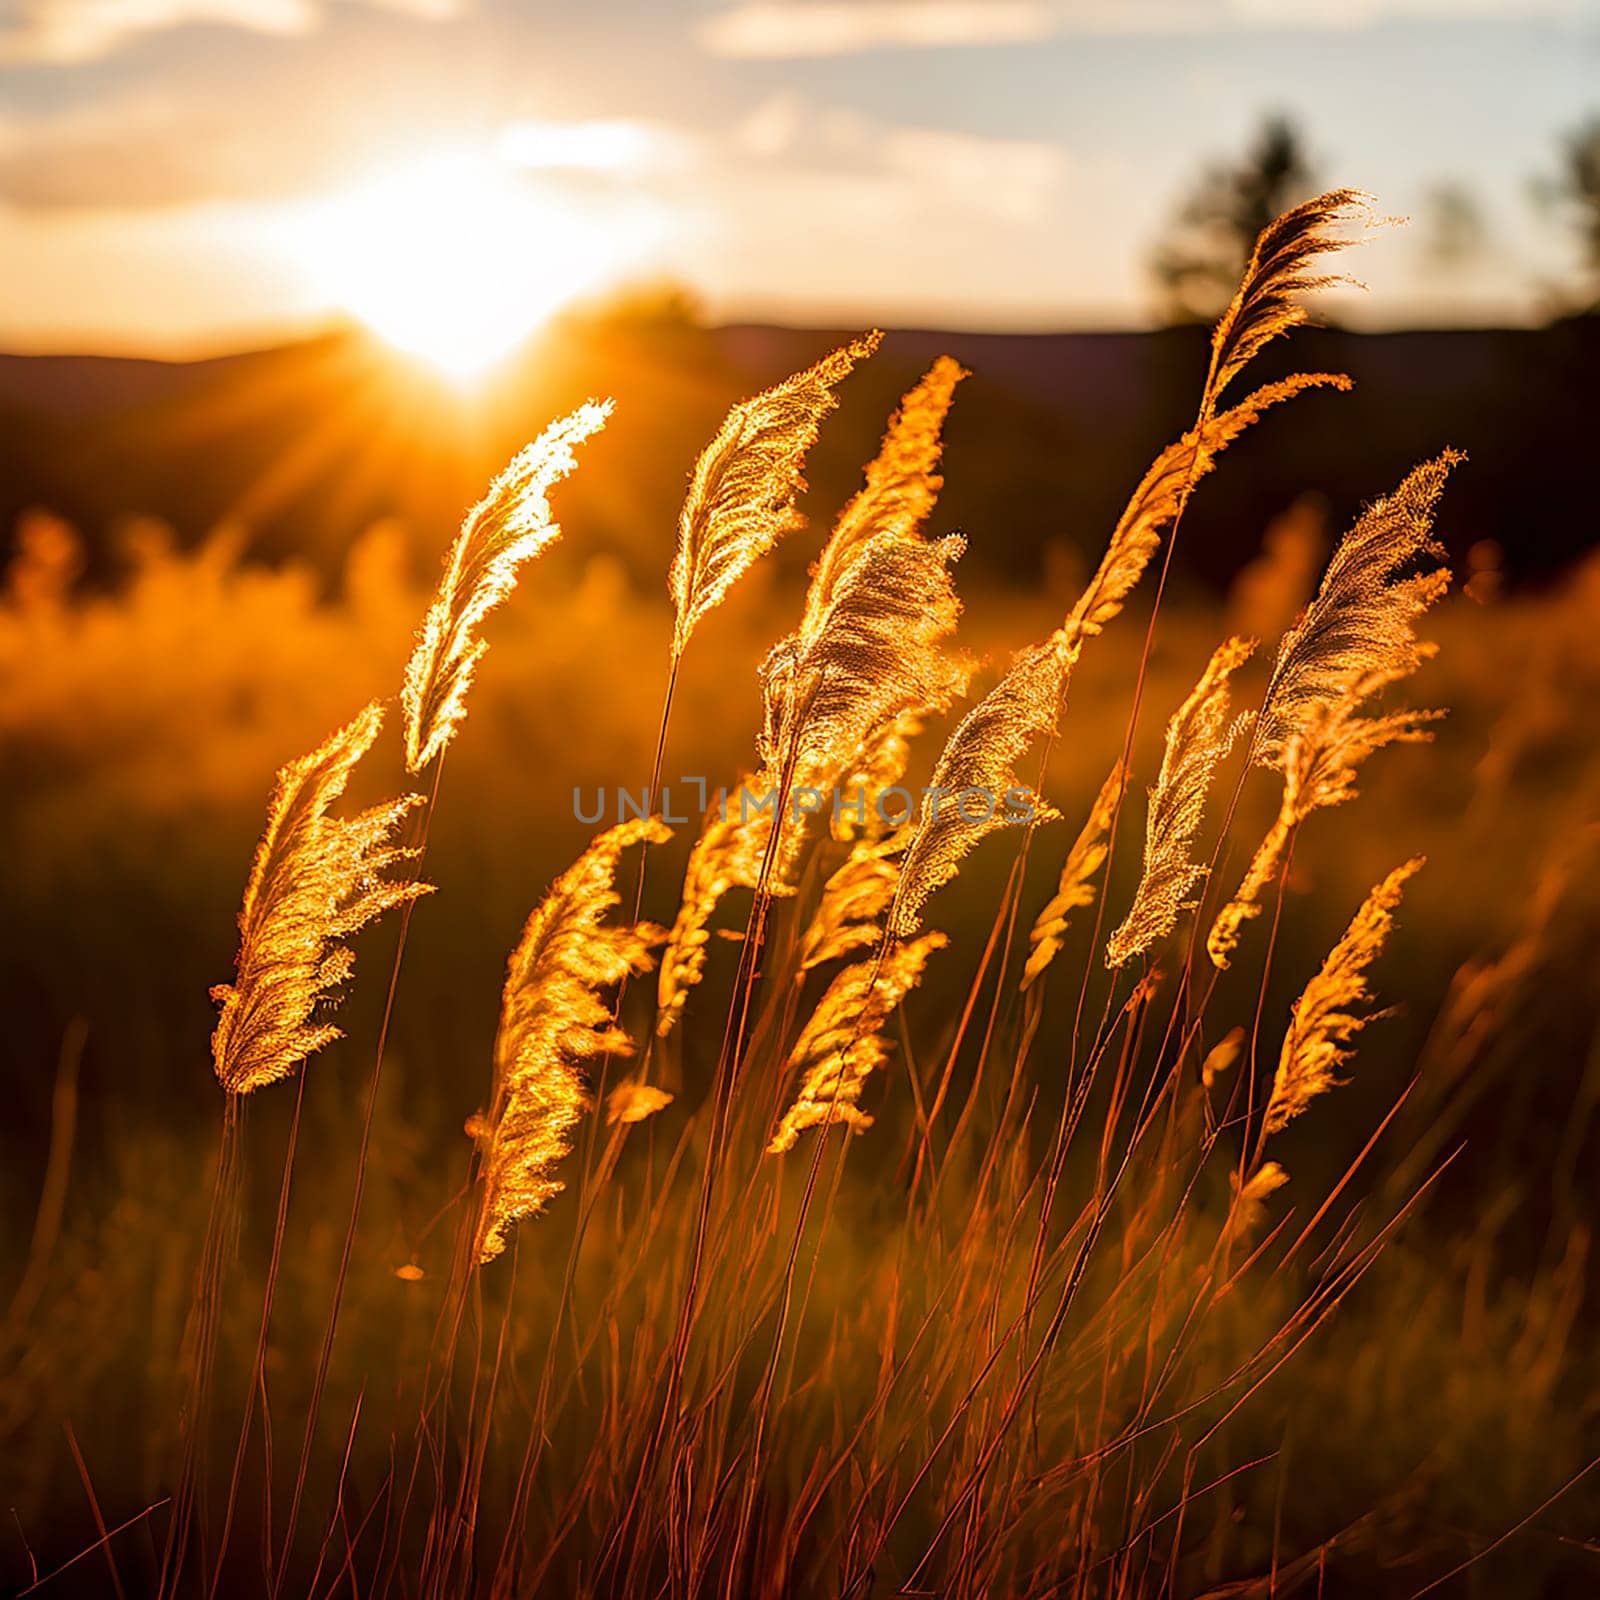 Nature's Embrace: Blowing Wildgrass Gently Caressed by Warm Sunlight by Petrichor